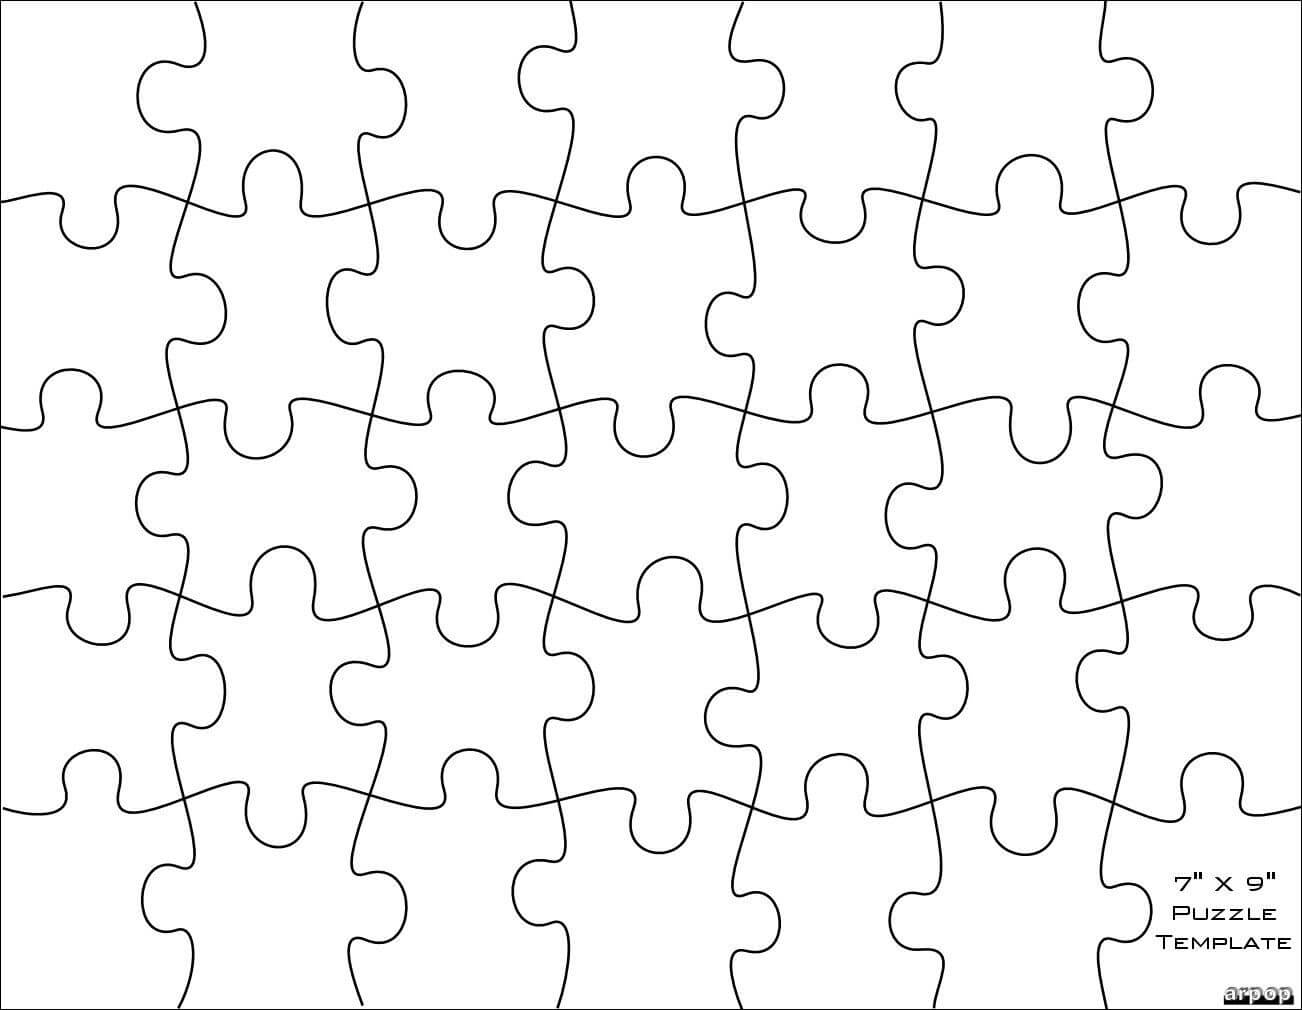 Jigsaw Pattern Templates. I Know I Want To Use It, But I Don for Jigsaw Puzzle Template For Word